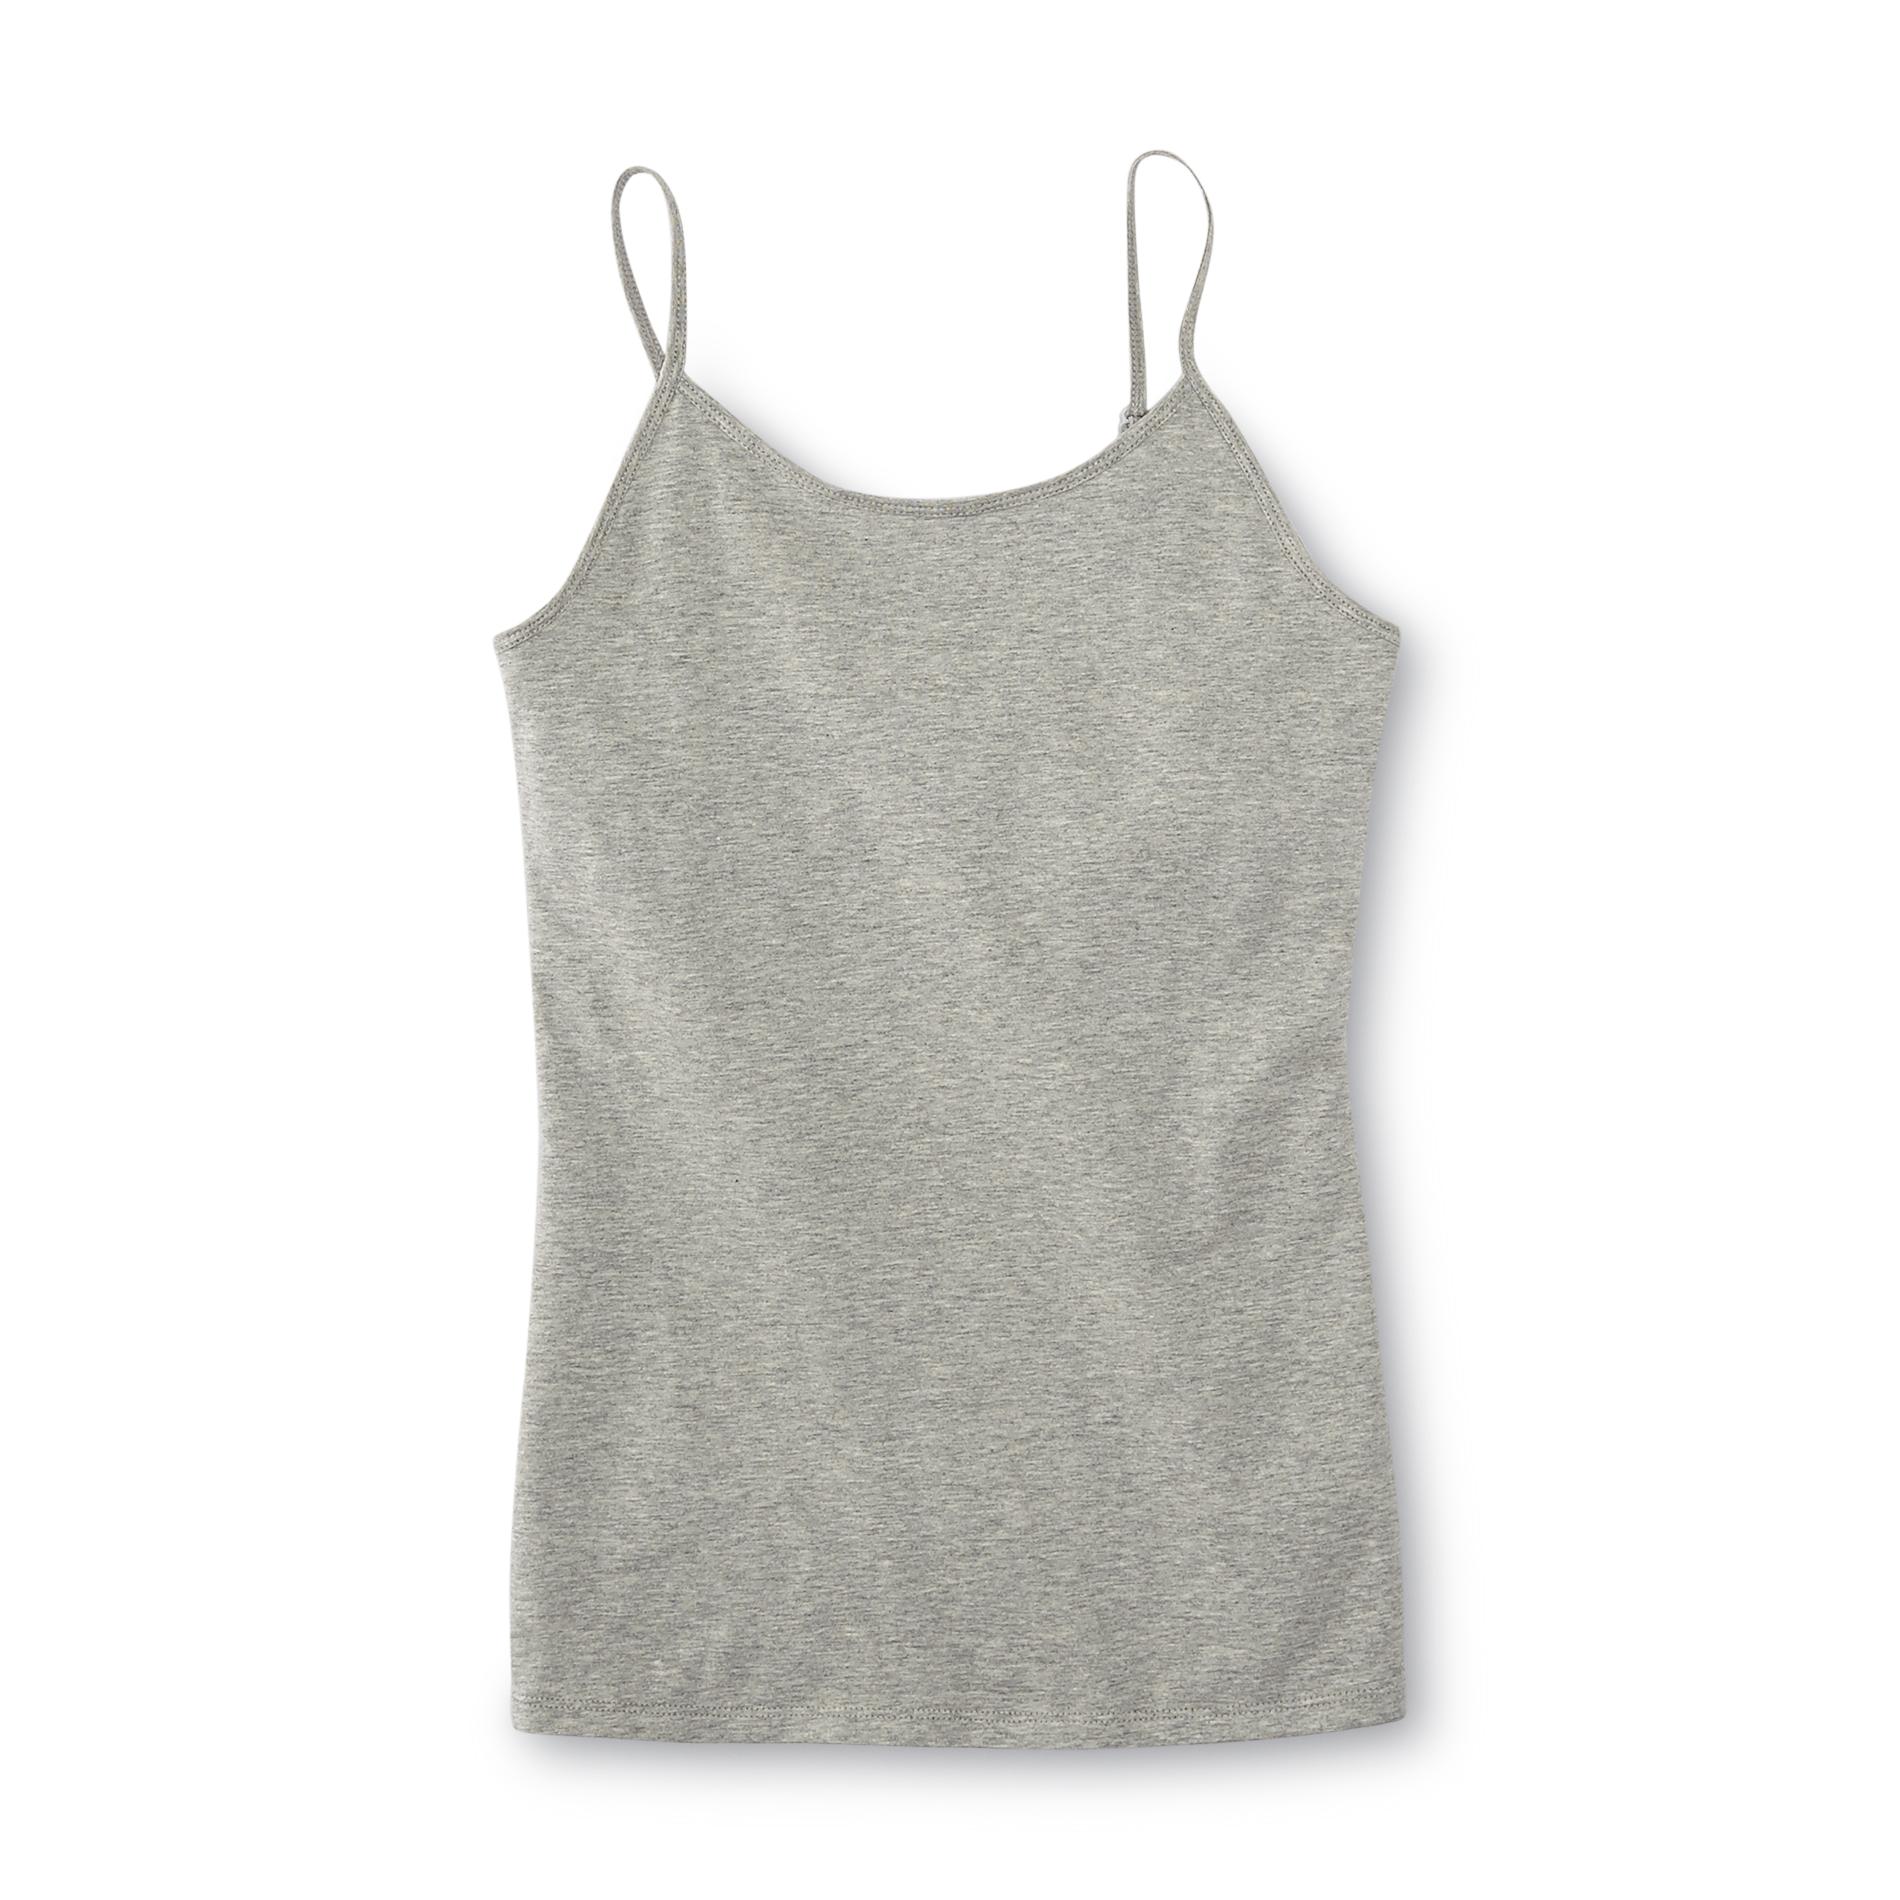 Simply Styled Girl's Camisole